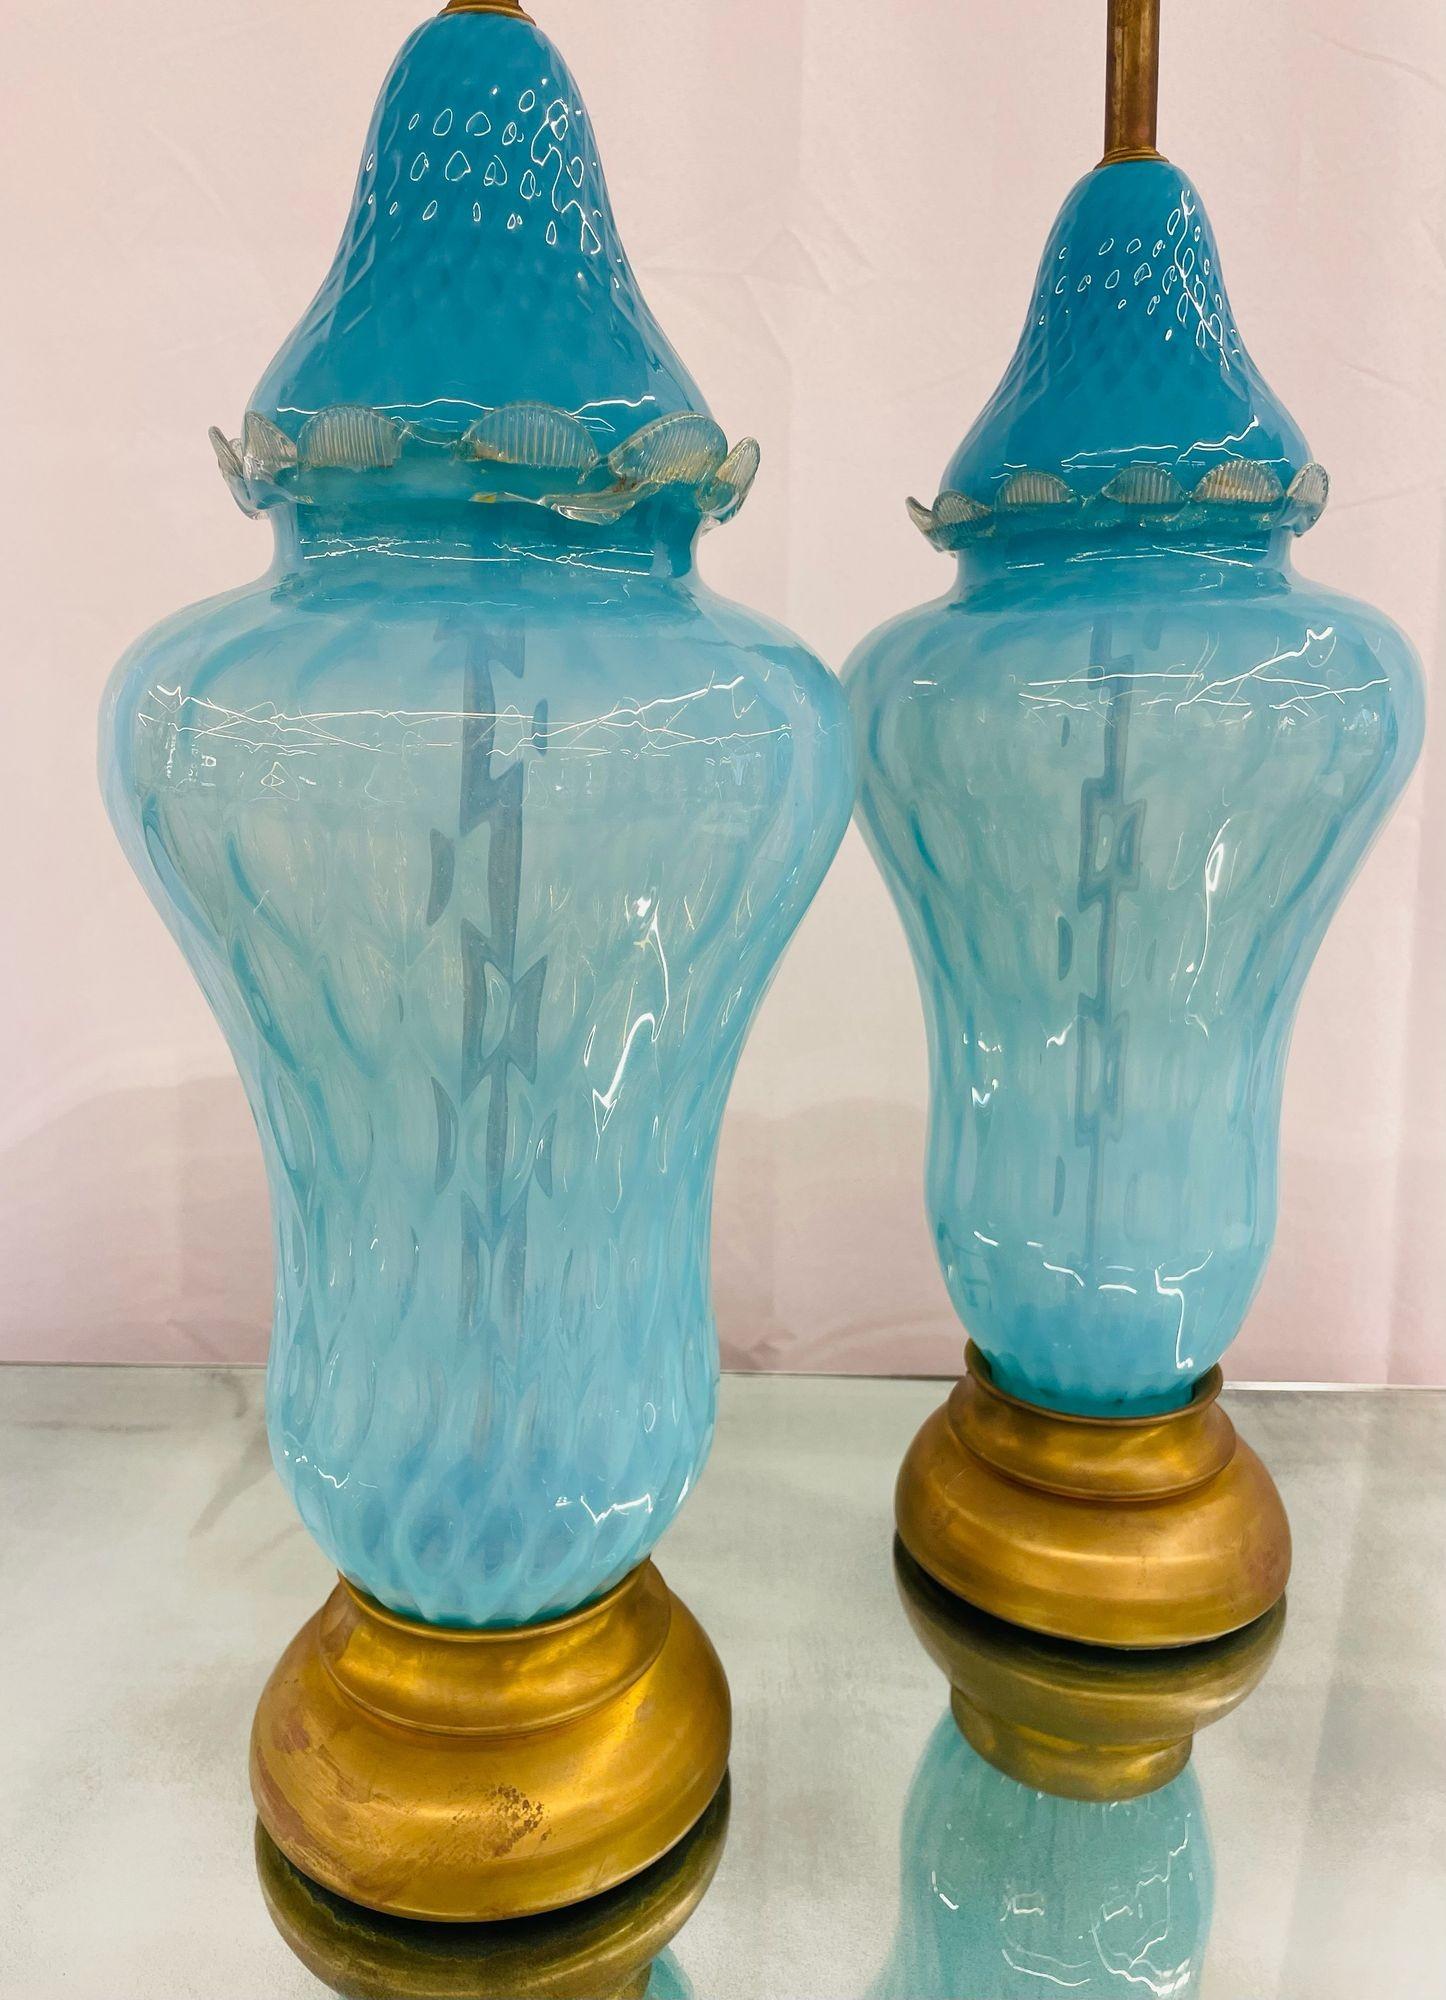 Pair of Italian Mid-Century Modern Murano Glass Table Lamps, Turquoise, Brass In Good Condition For Sale In Stamford, CT